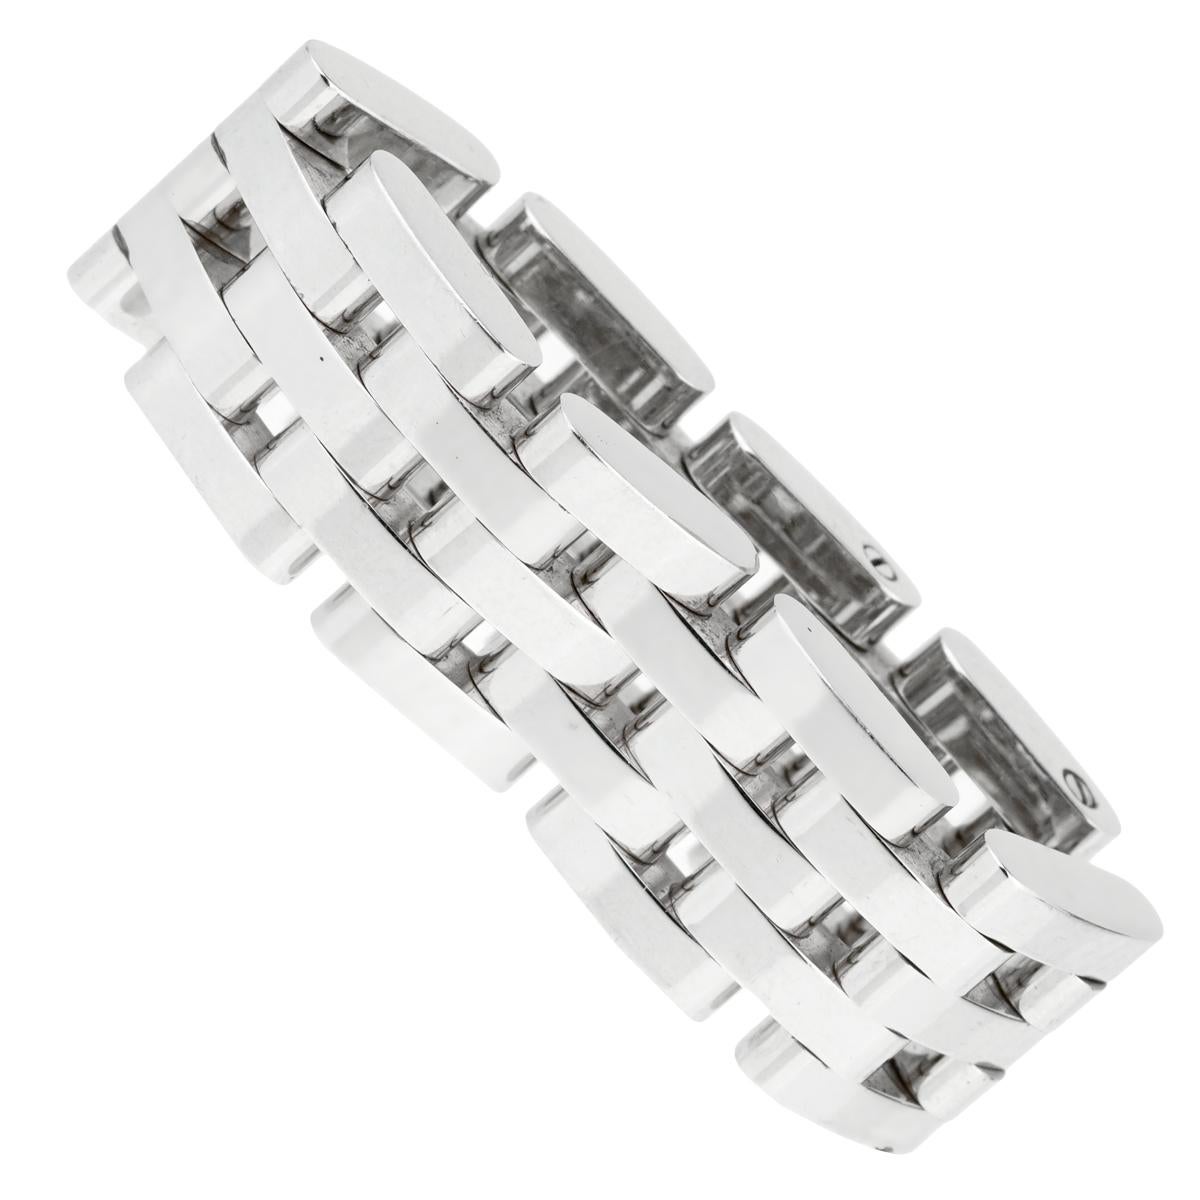 A fabulous Chopard Les Chaines ring showcasing 5 flexible rows of 18k white gold. This classic design is perfect for everyday wear.

Width: .37